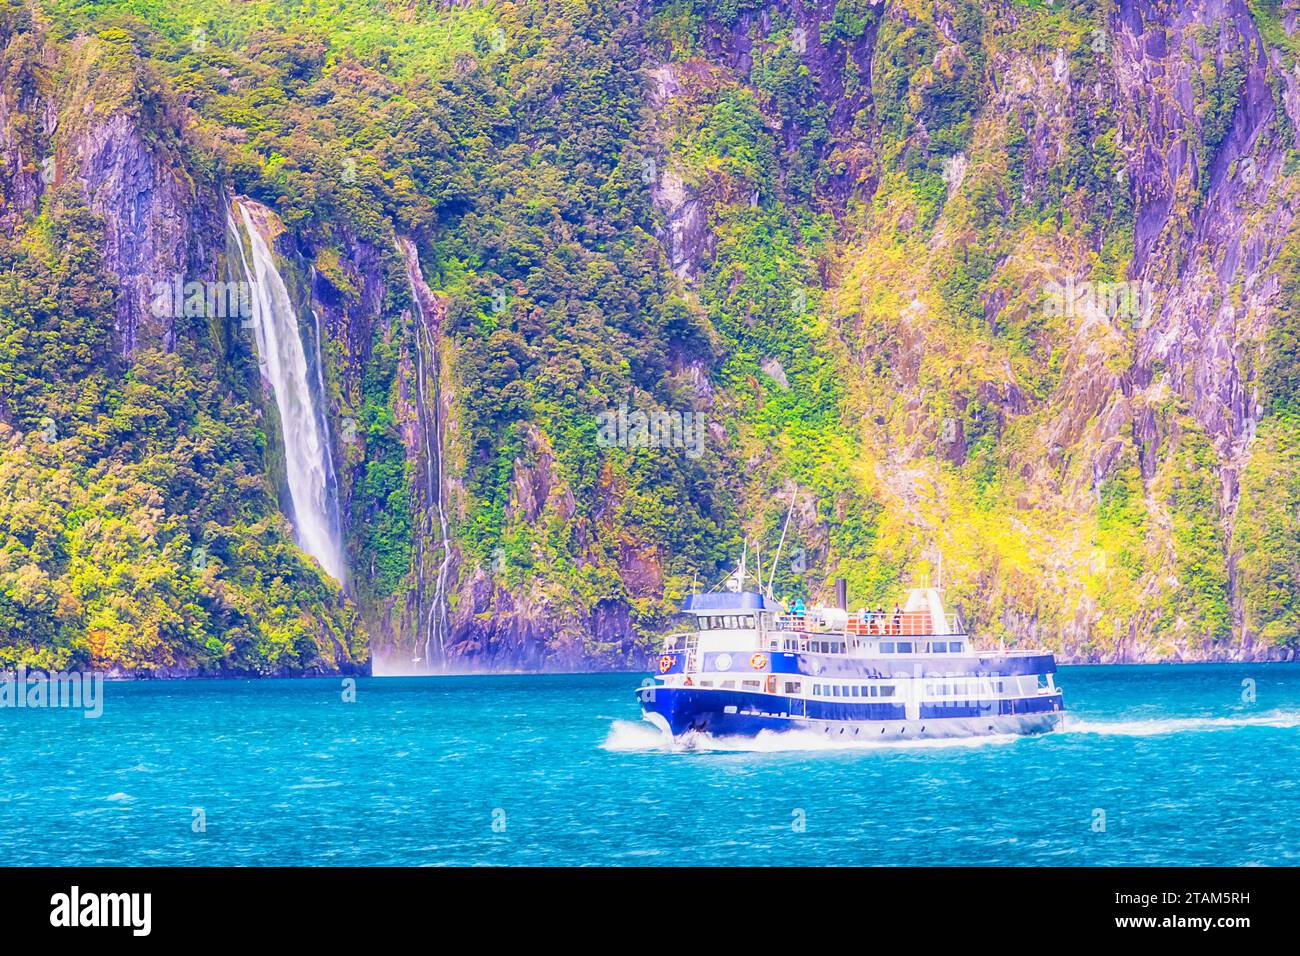 Exploratory cruise ship with tourists on board at Stirling waterfall in Milford Sound fiordland of New Zealand. Stock Photo